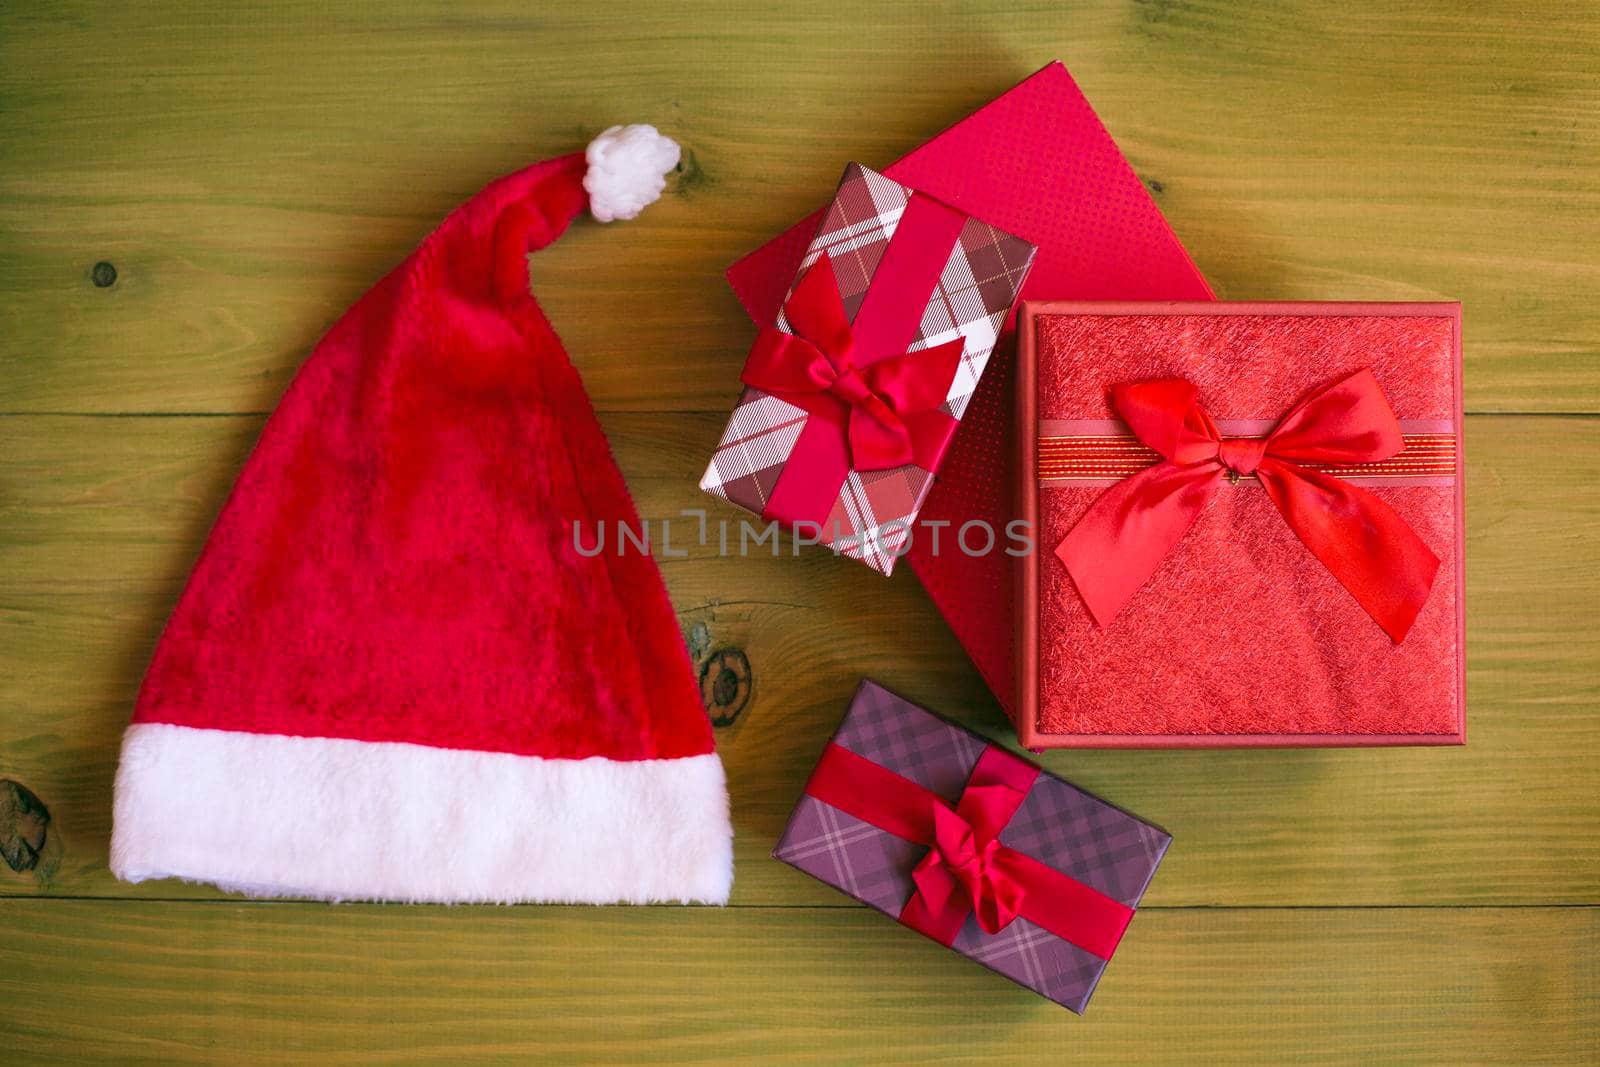 Image of Santa Hat and gifts on wooden table.